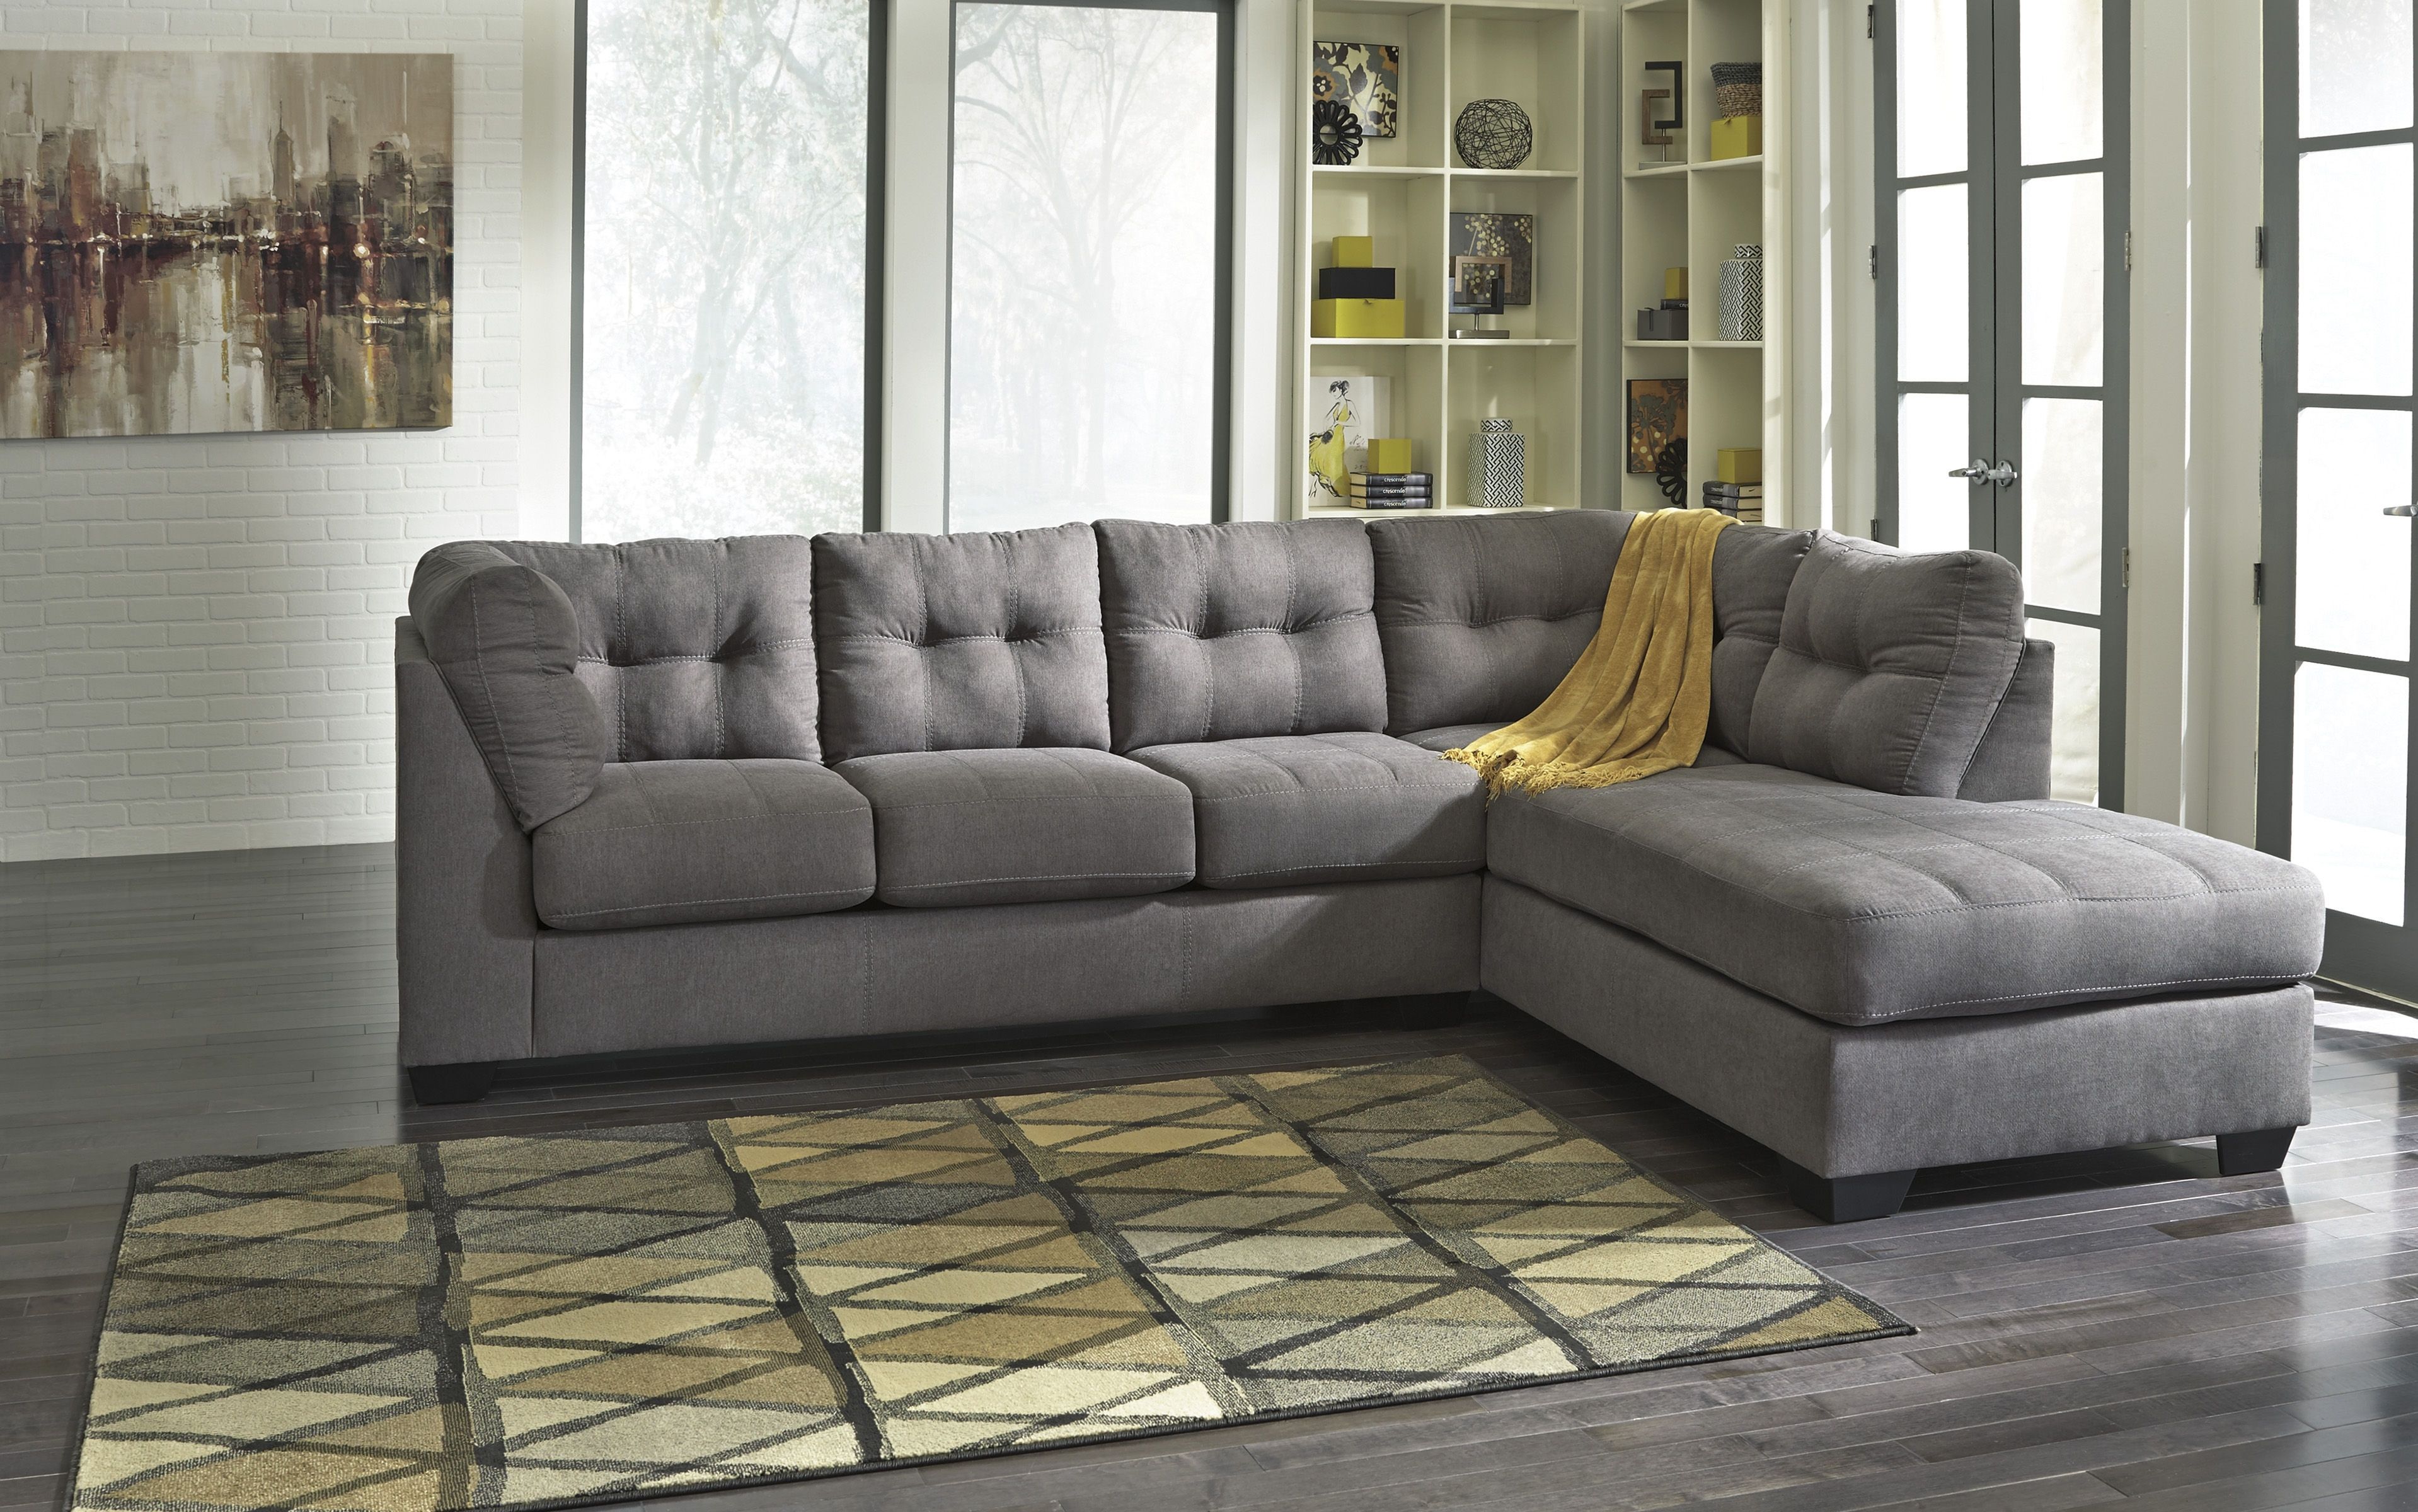 Ashley Furniture Maier Charcoal Raf Chaise Sectional | The Classy Home Regarding Lucy Grey 2 Piece Sleeper Sectionals With Raf Chaise (View 7 of 30)